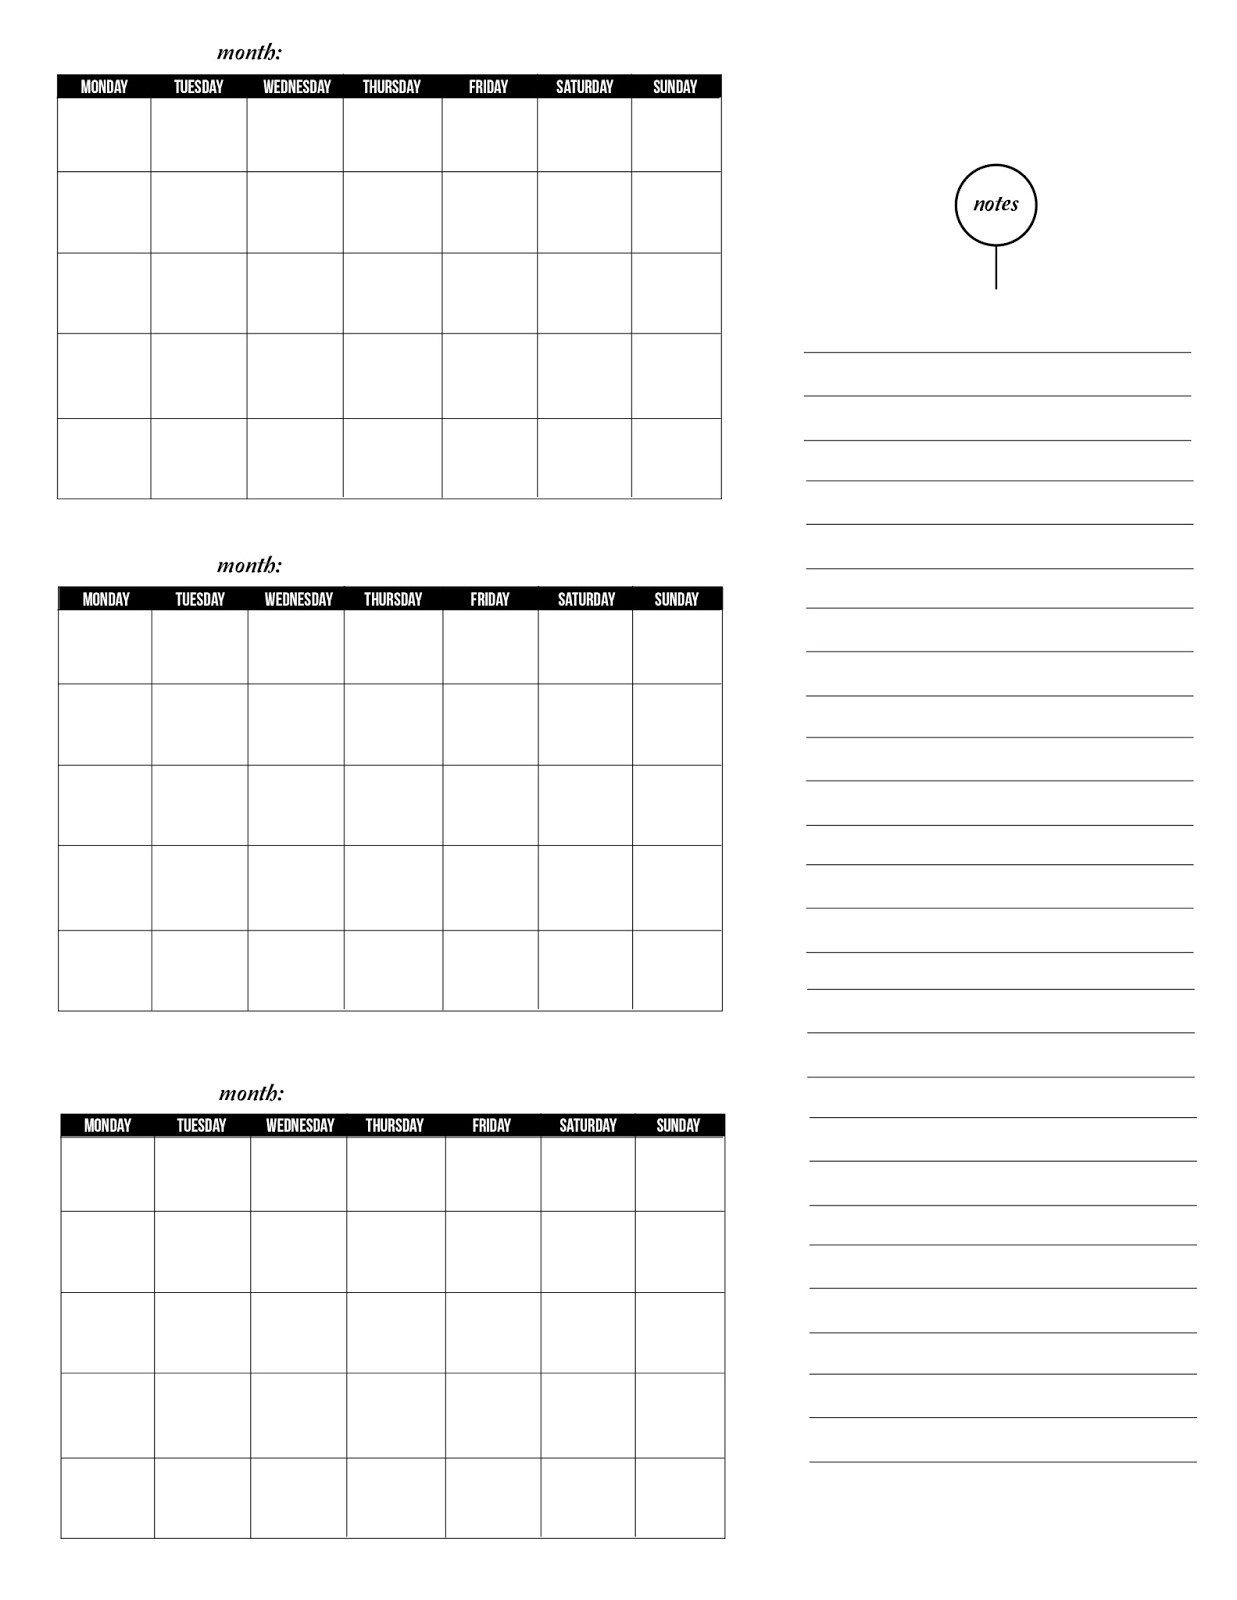 3 Month Calendar Templates Celo Yogawithjo Co Free Printable Three throughout Printable 3 Month Calendar Templates